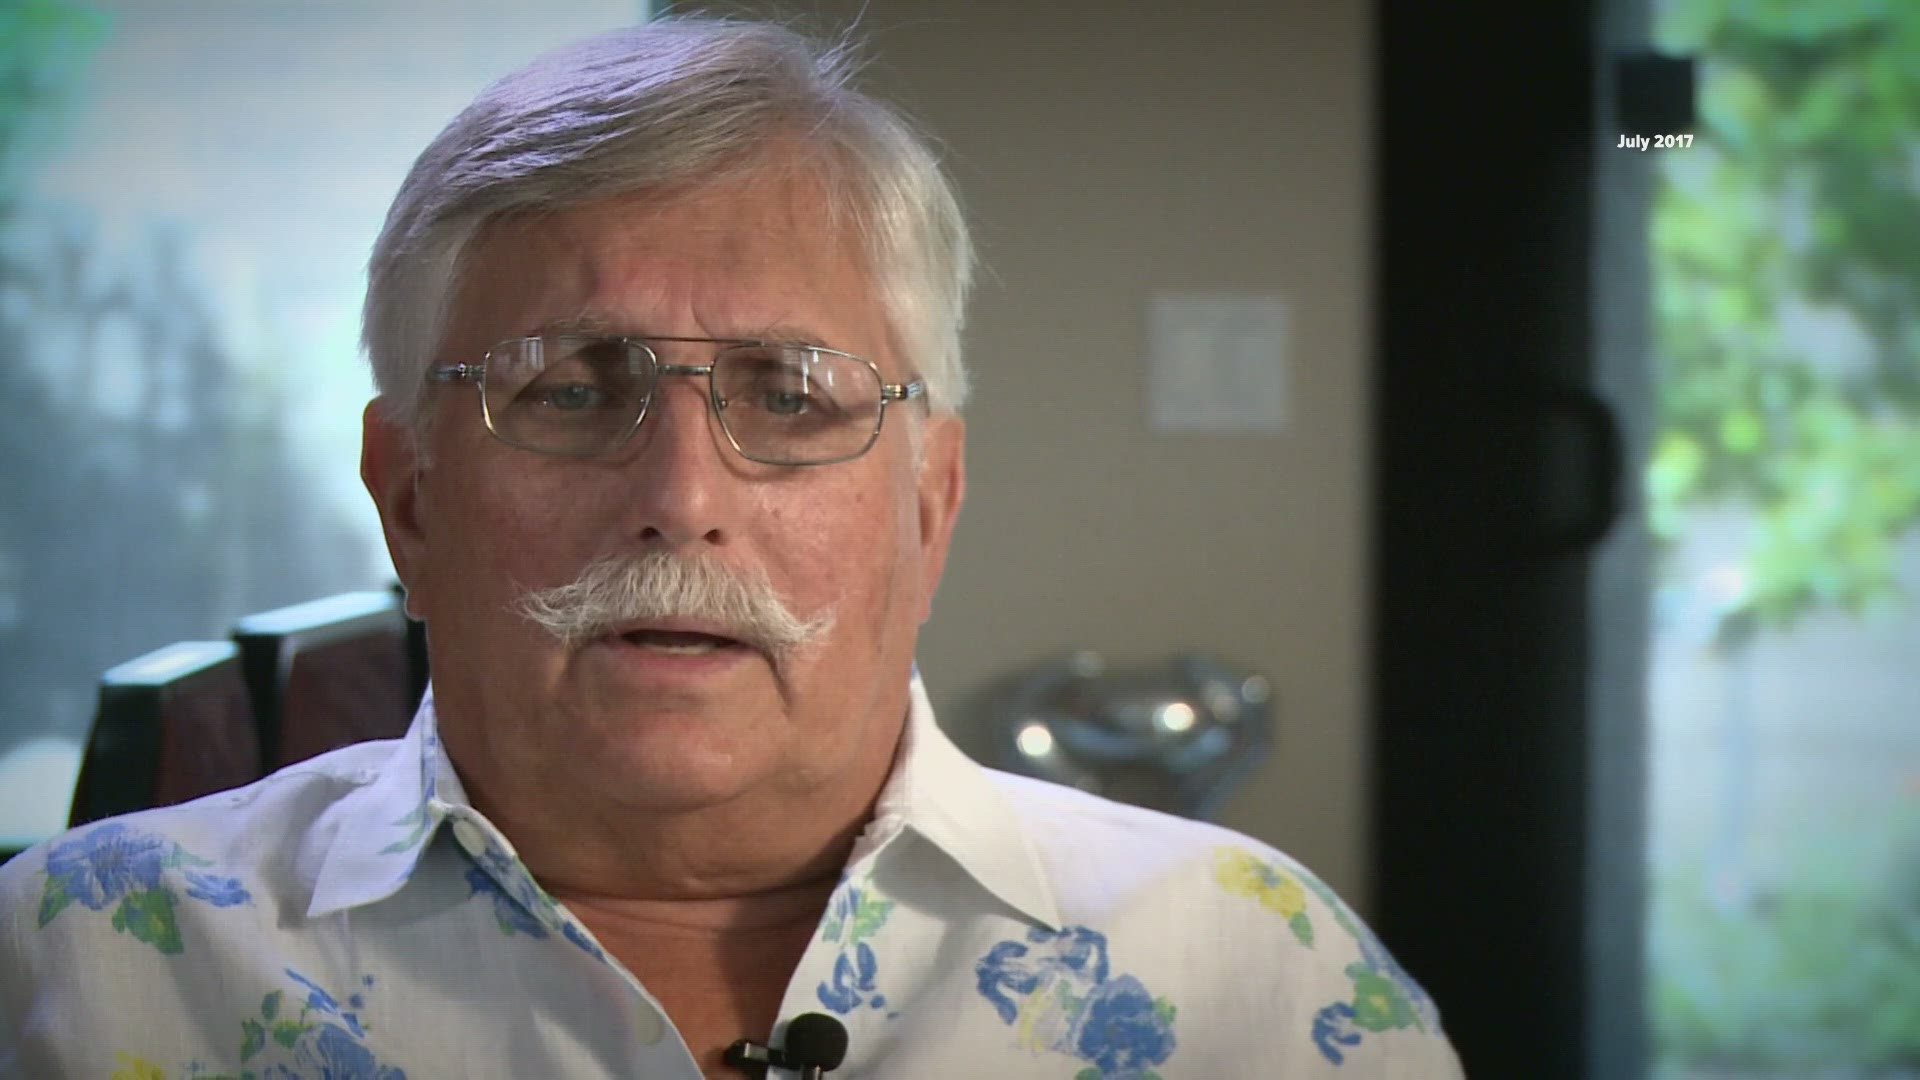 The family of Ron shared exclusive comments this morning with 12News this afternoon. We're revisiting our 1-on-1 from 2017 with Ron Goldman's father.